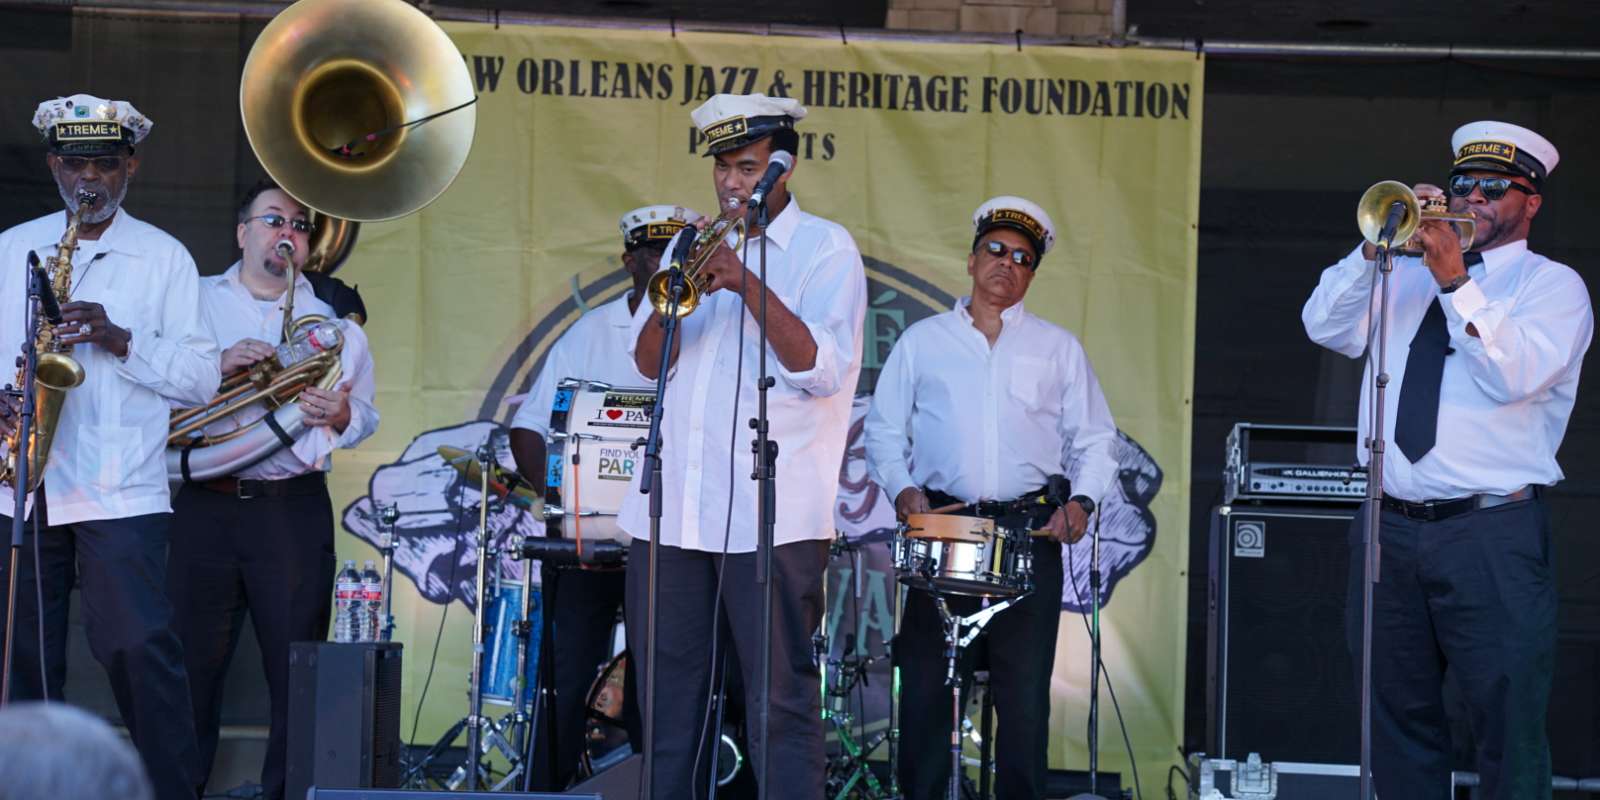 Treme Brass Band - Treme Creole Gumbo Fest 2016 - Armstrong Park